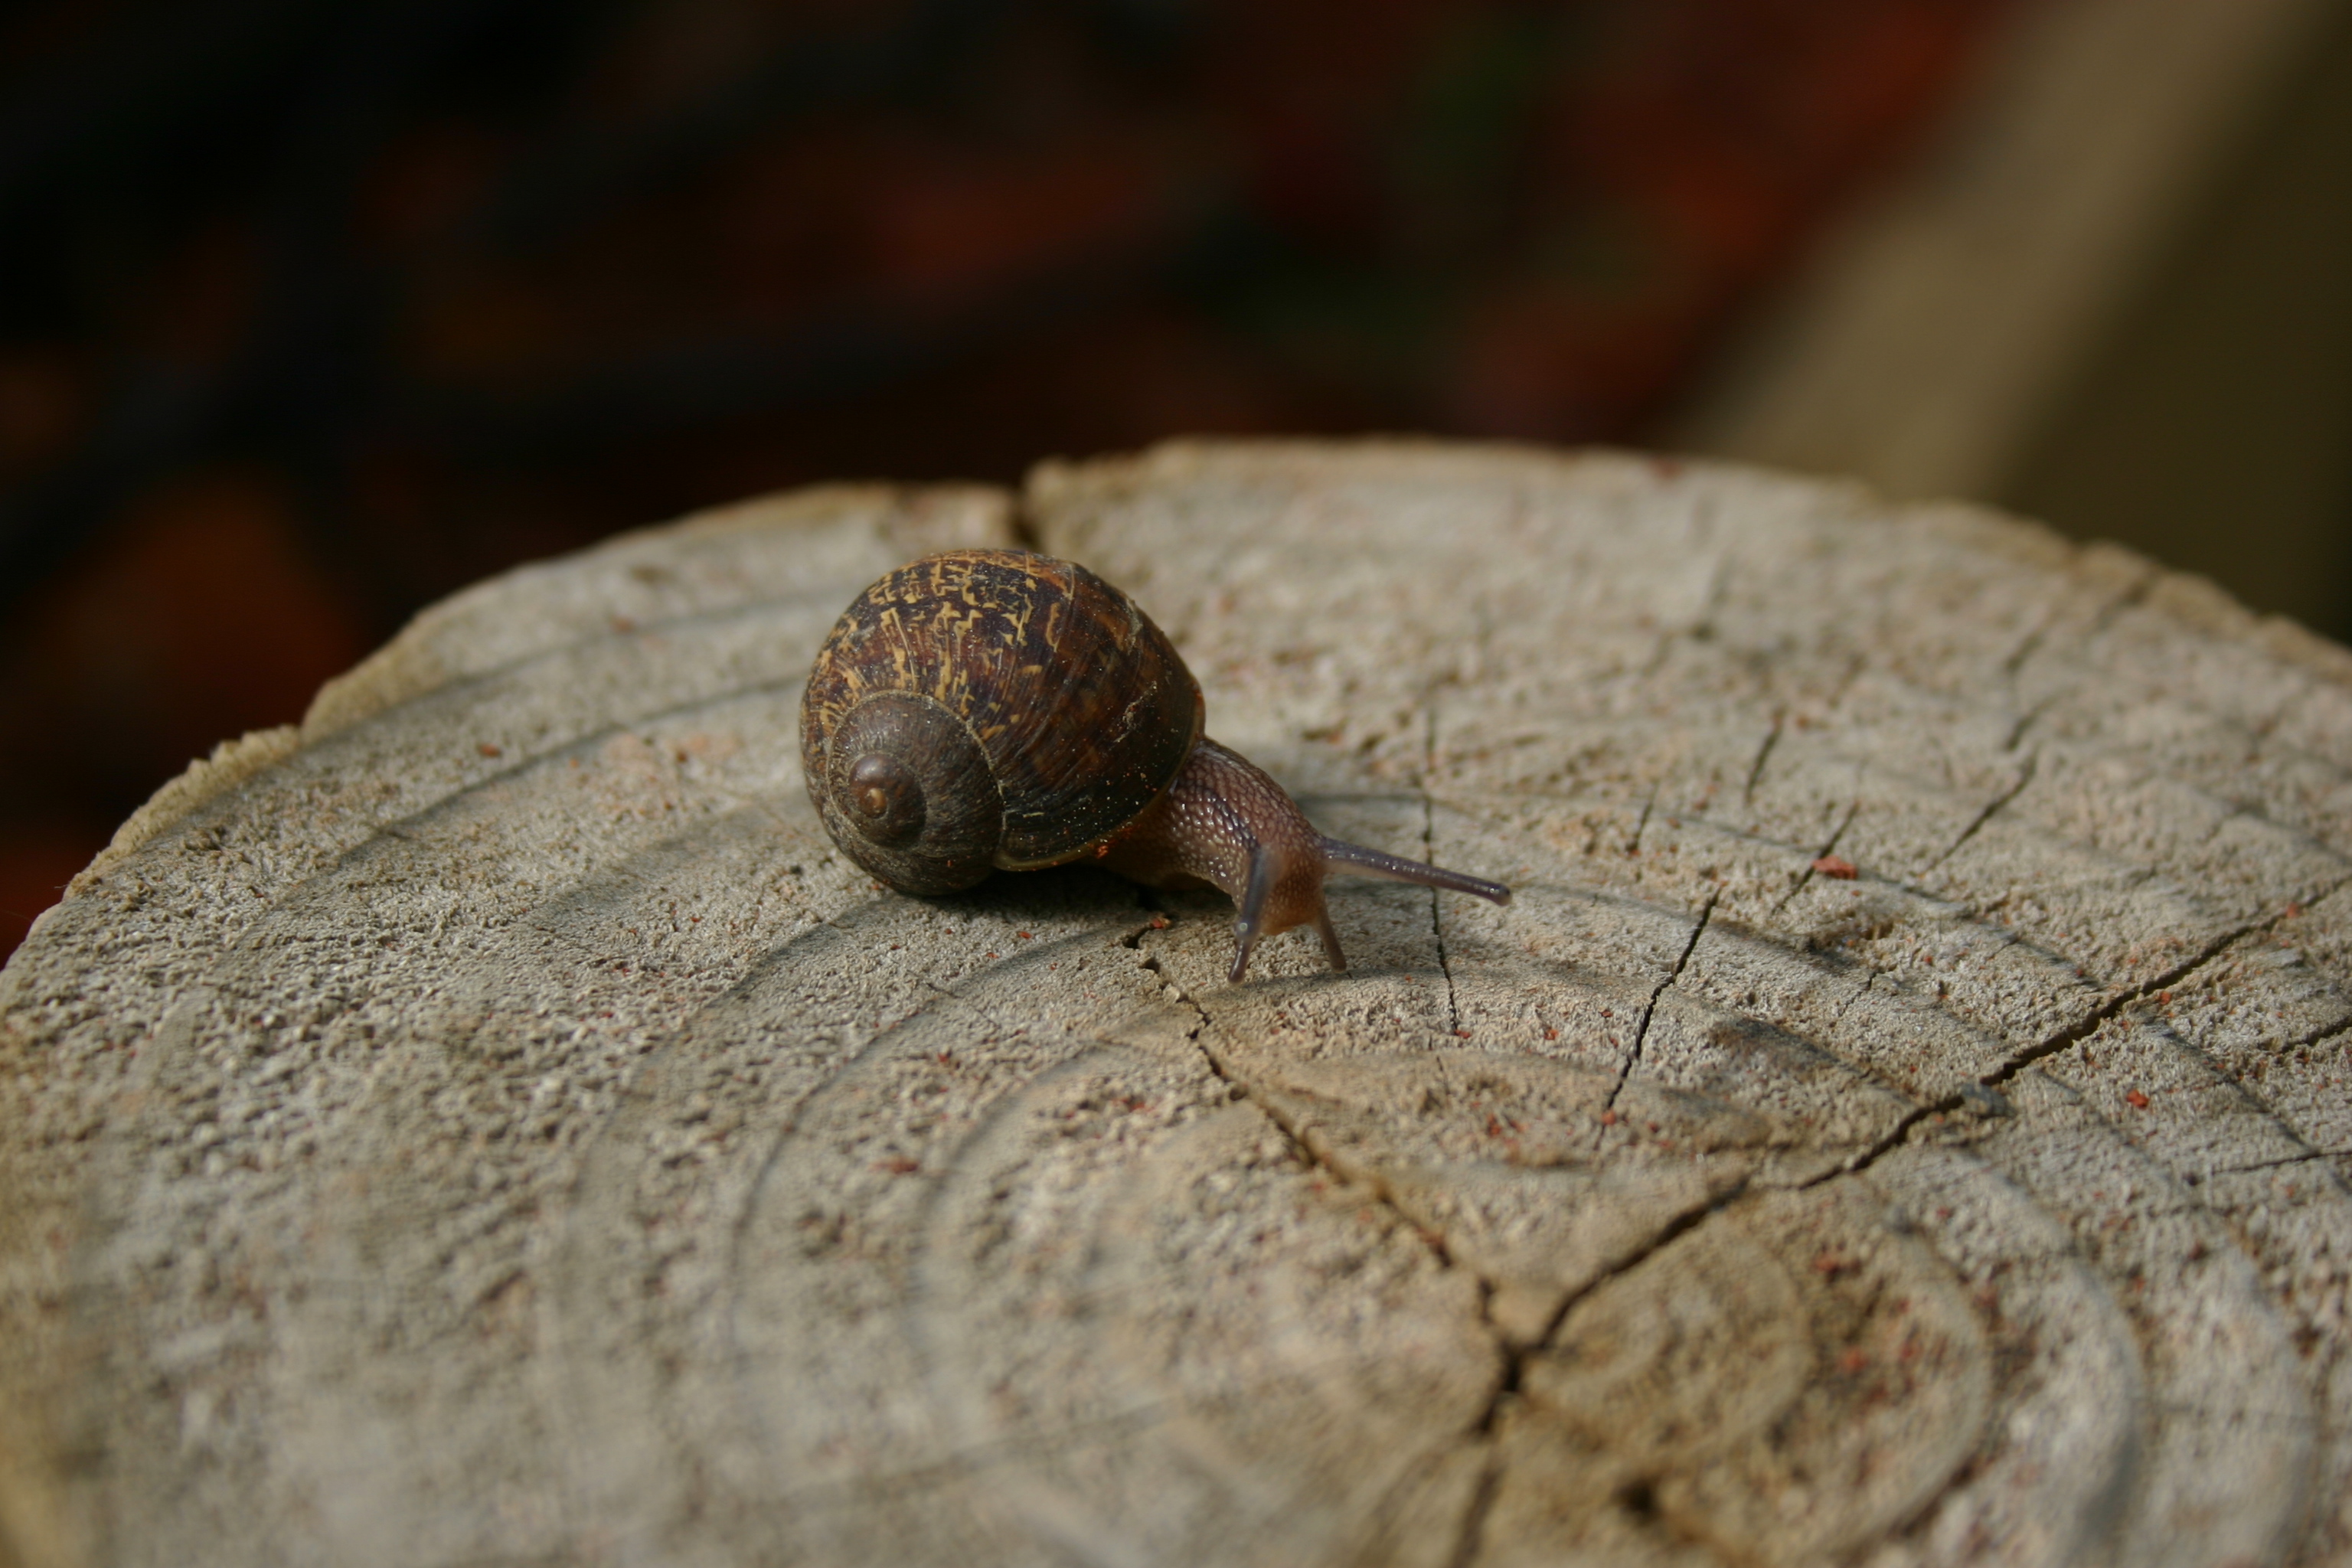 A garden snail examines the rings on a wood post.